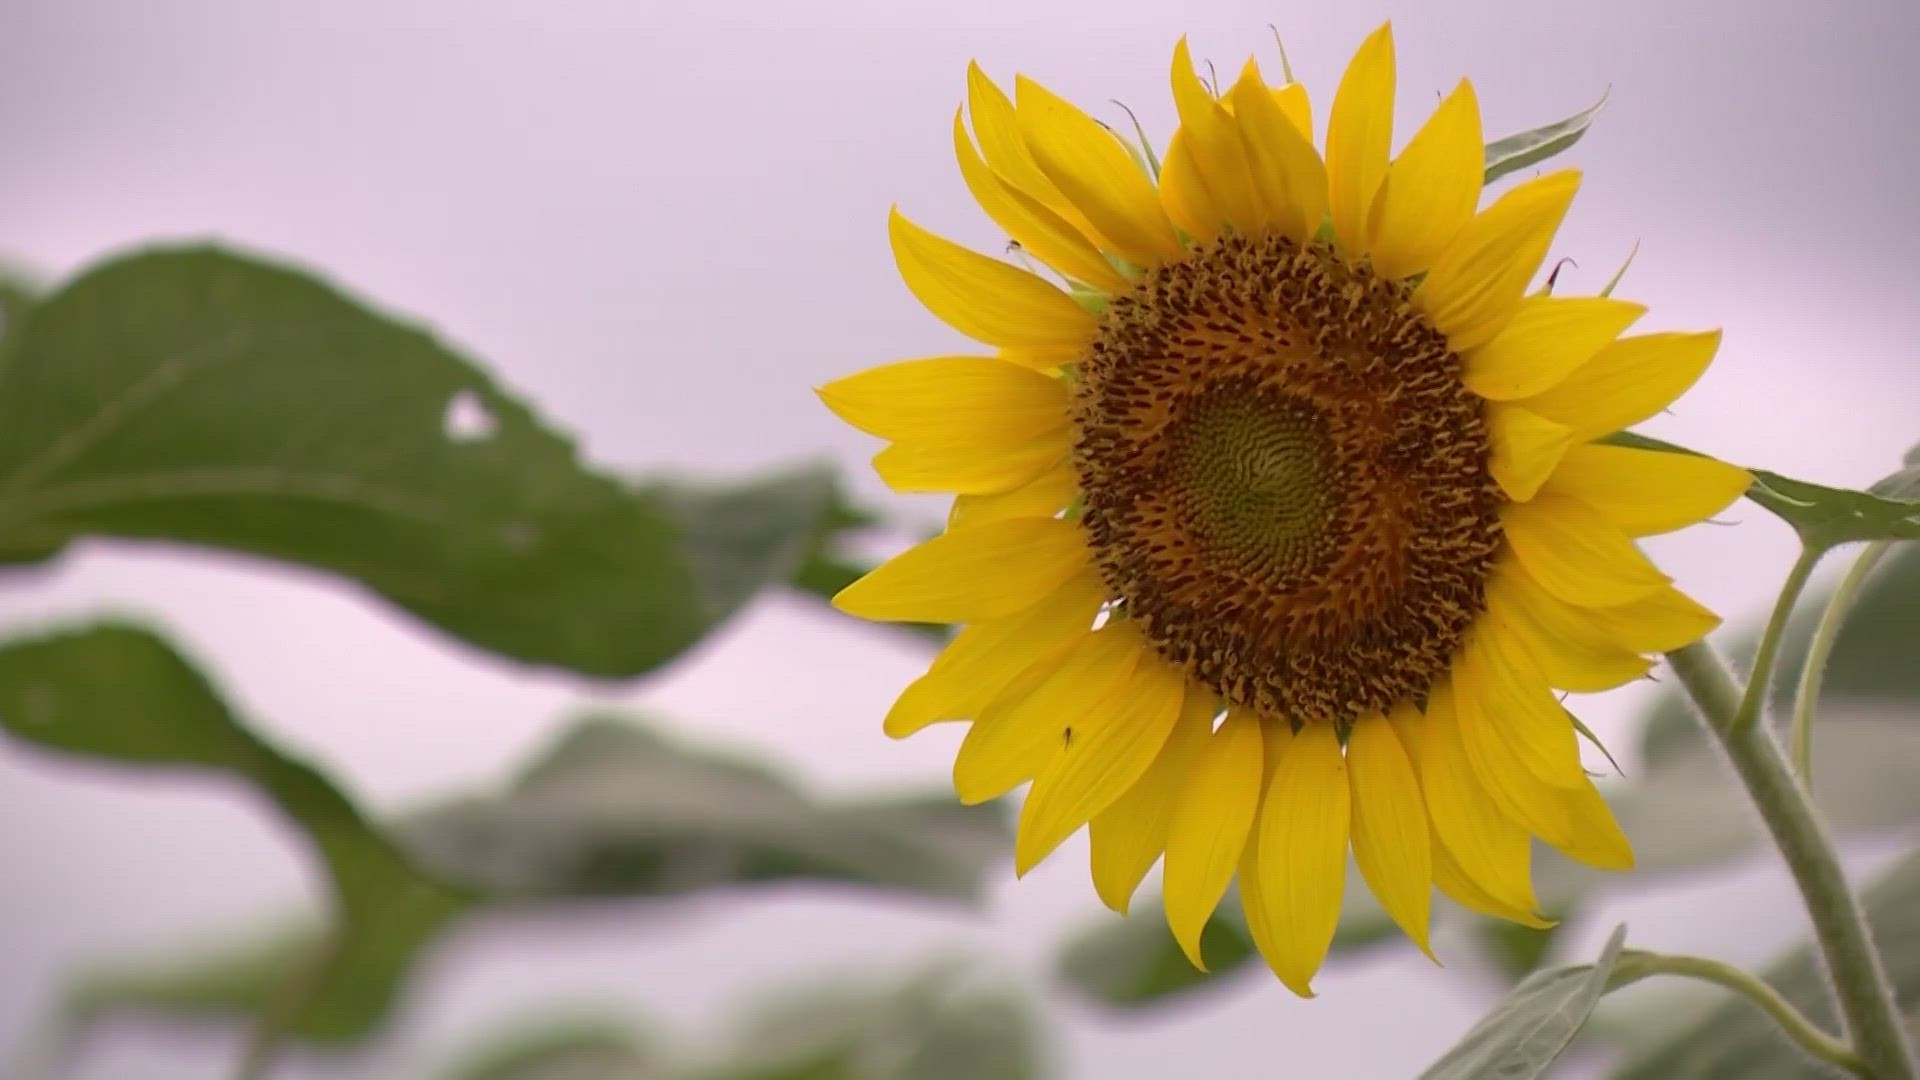 The family who came up with the idea of the sunflower field wanted to turn their sadness into something that the whole community can enjoy.